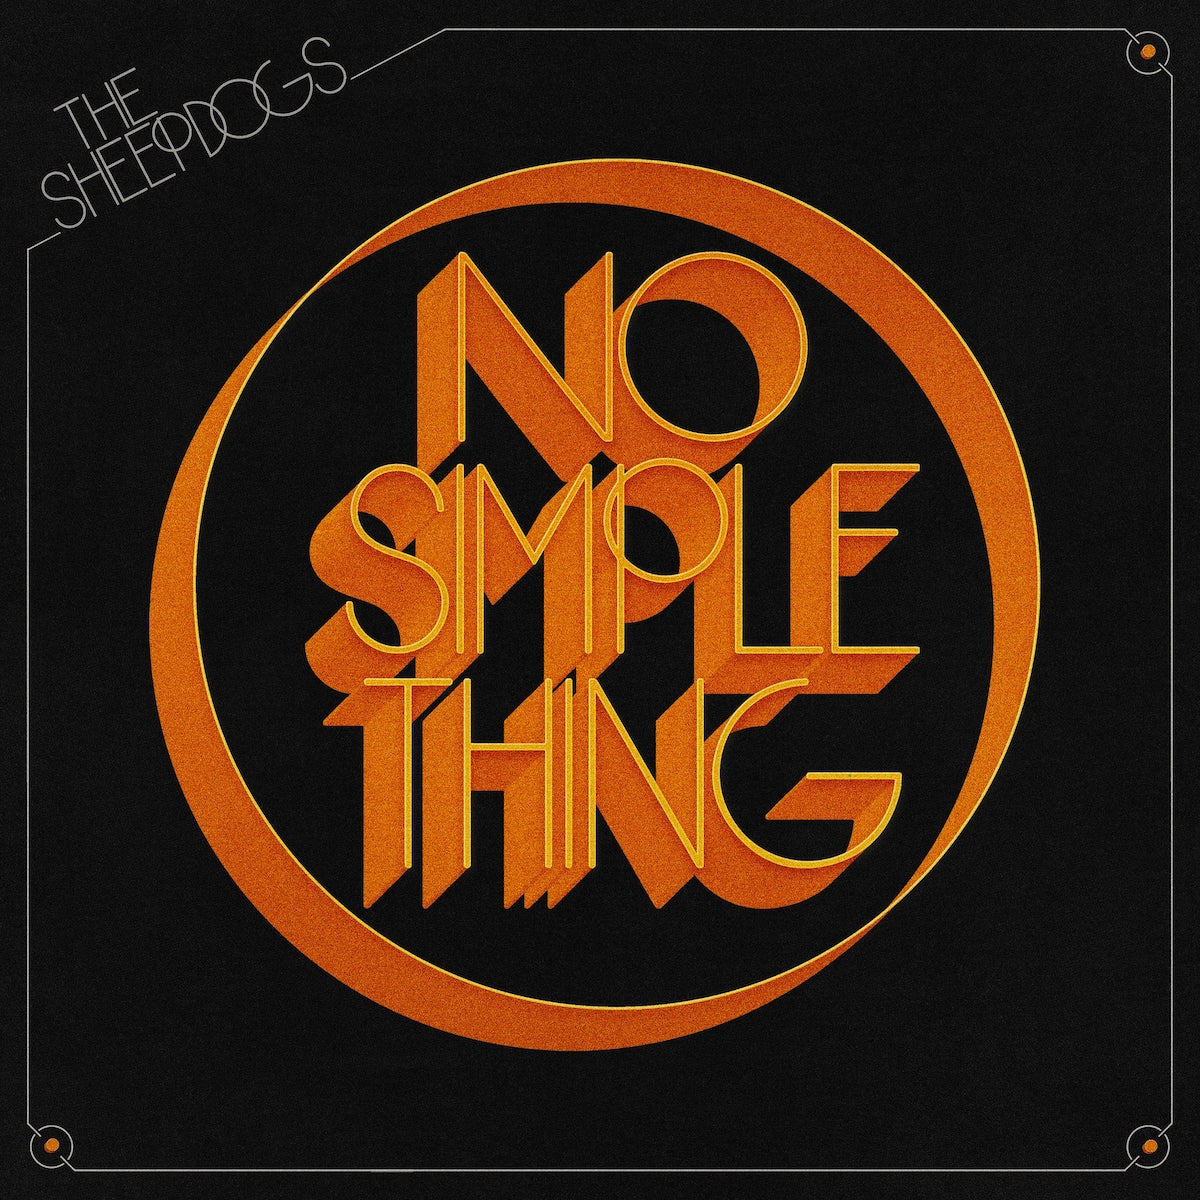 Sheepdogs - No Simple Thing (Vinyl Colour EP)